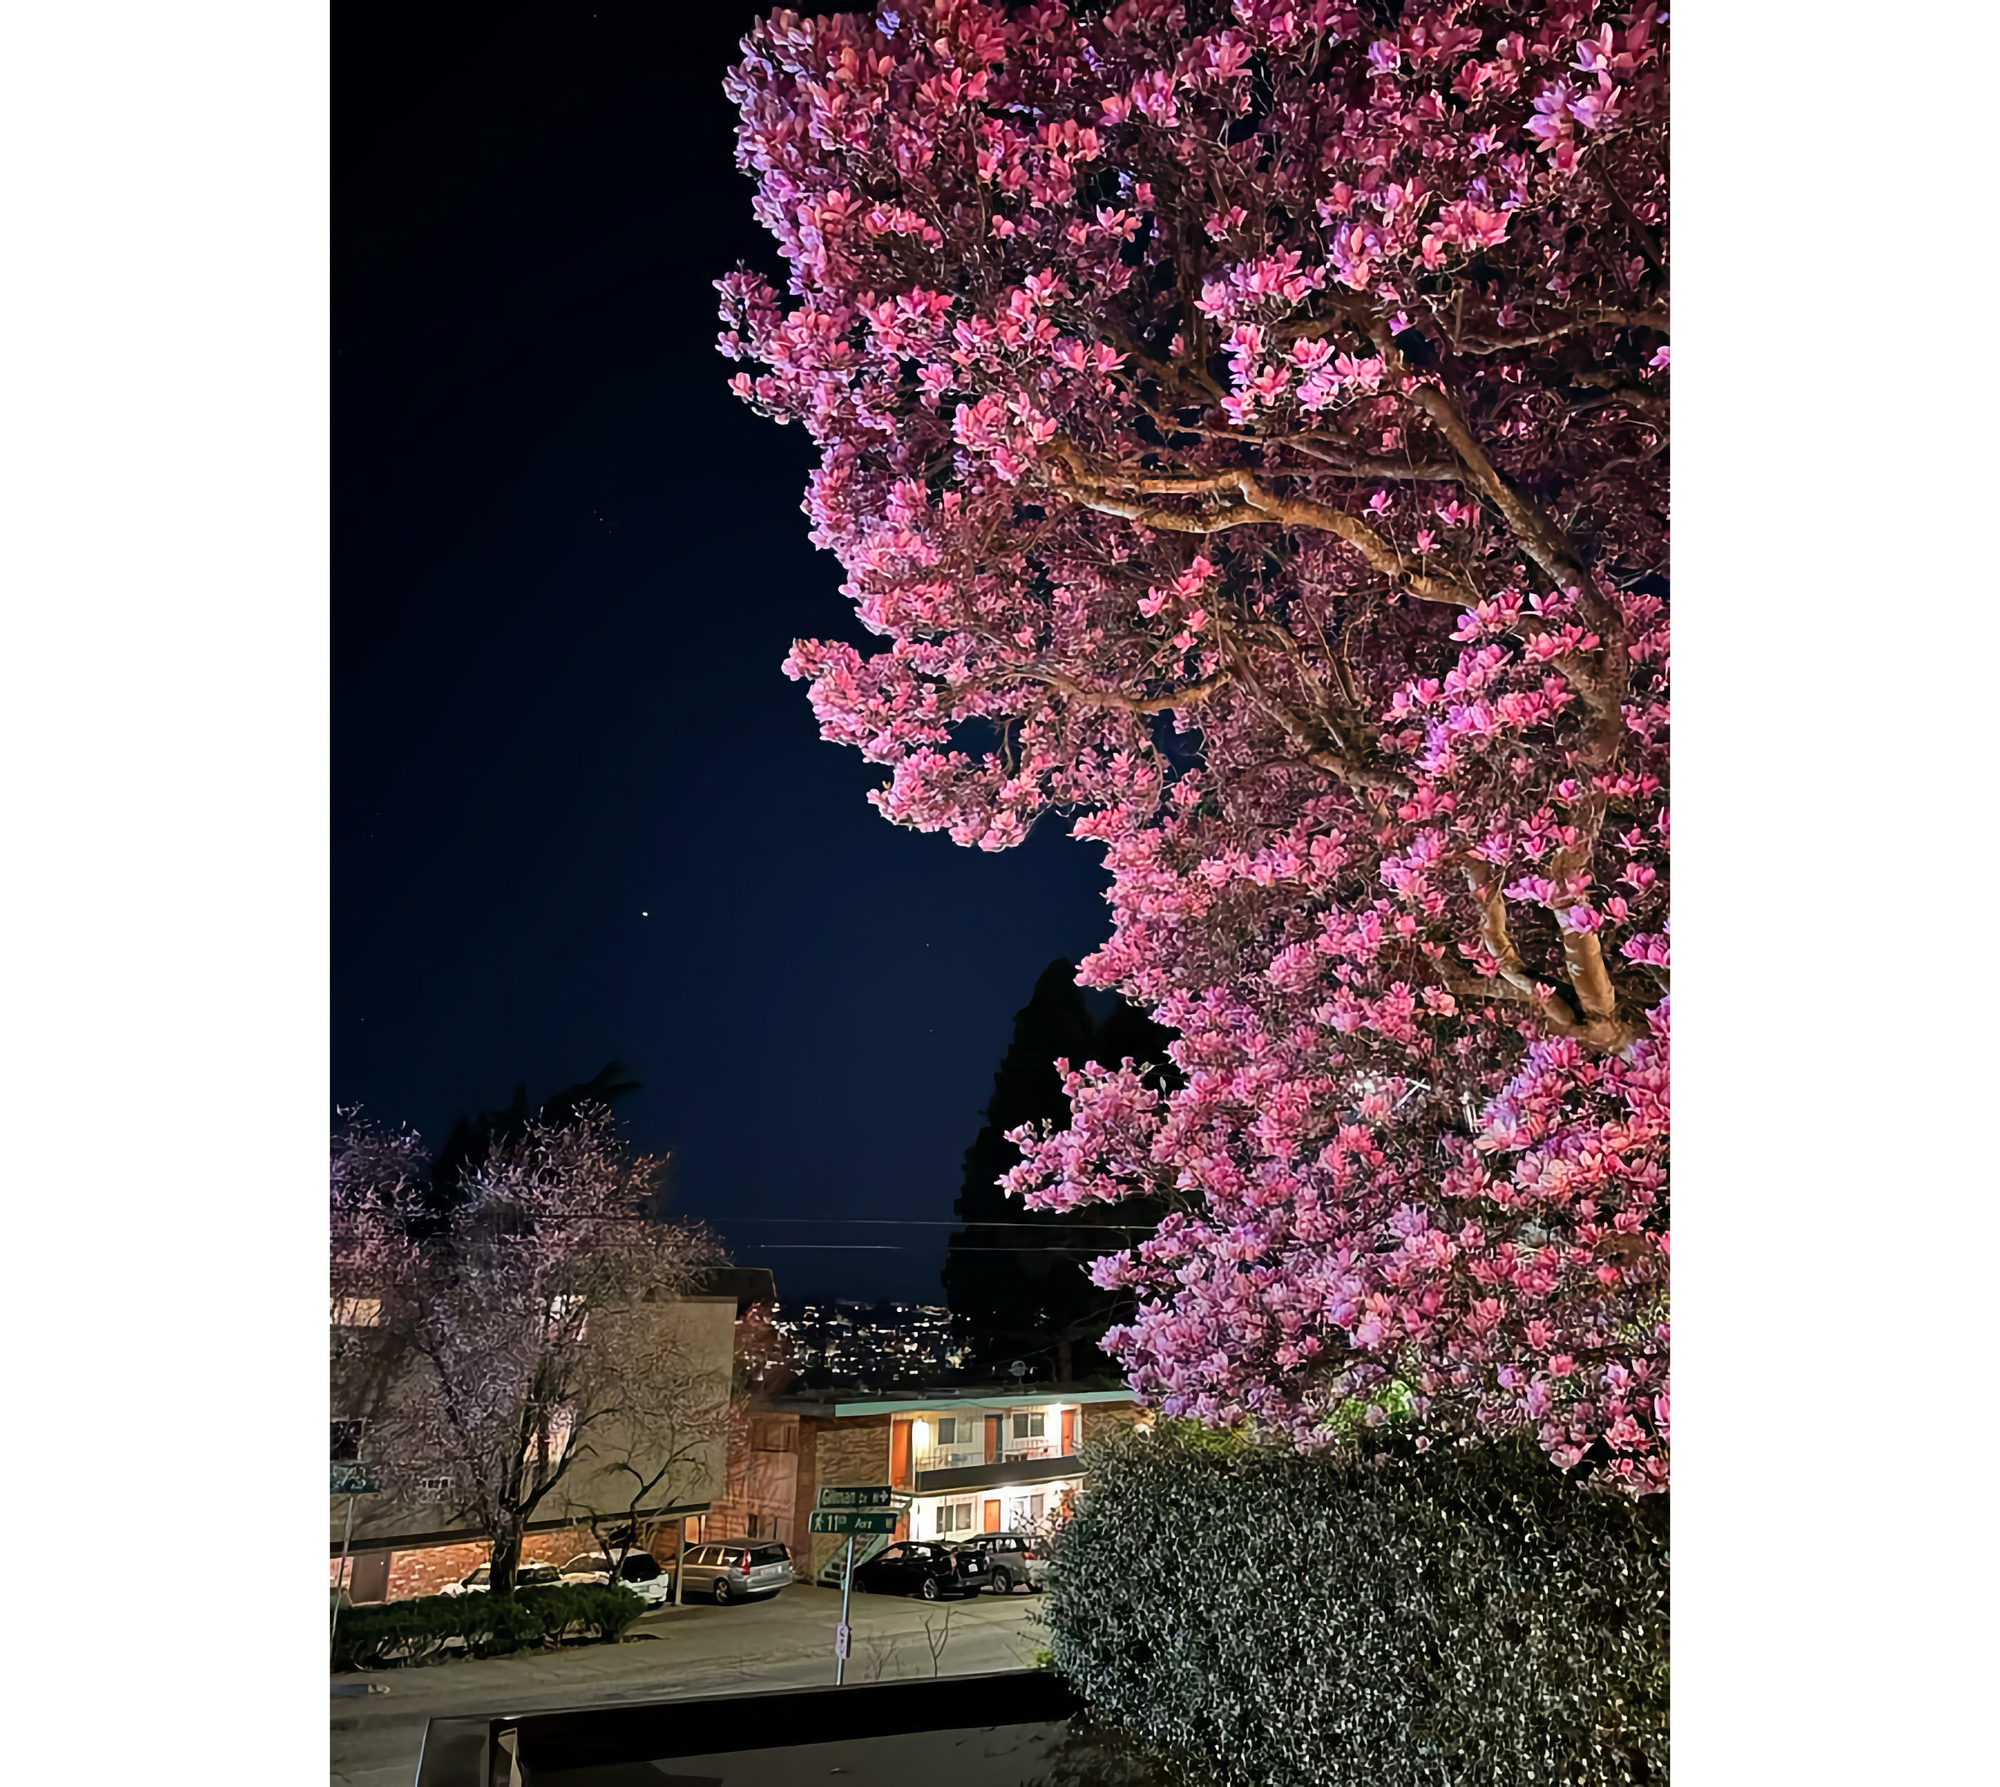 Photo of magnolia tree in full bloom at night, with Venus in the background sky